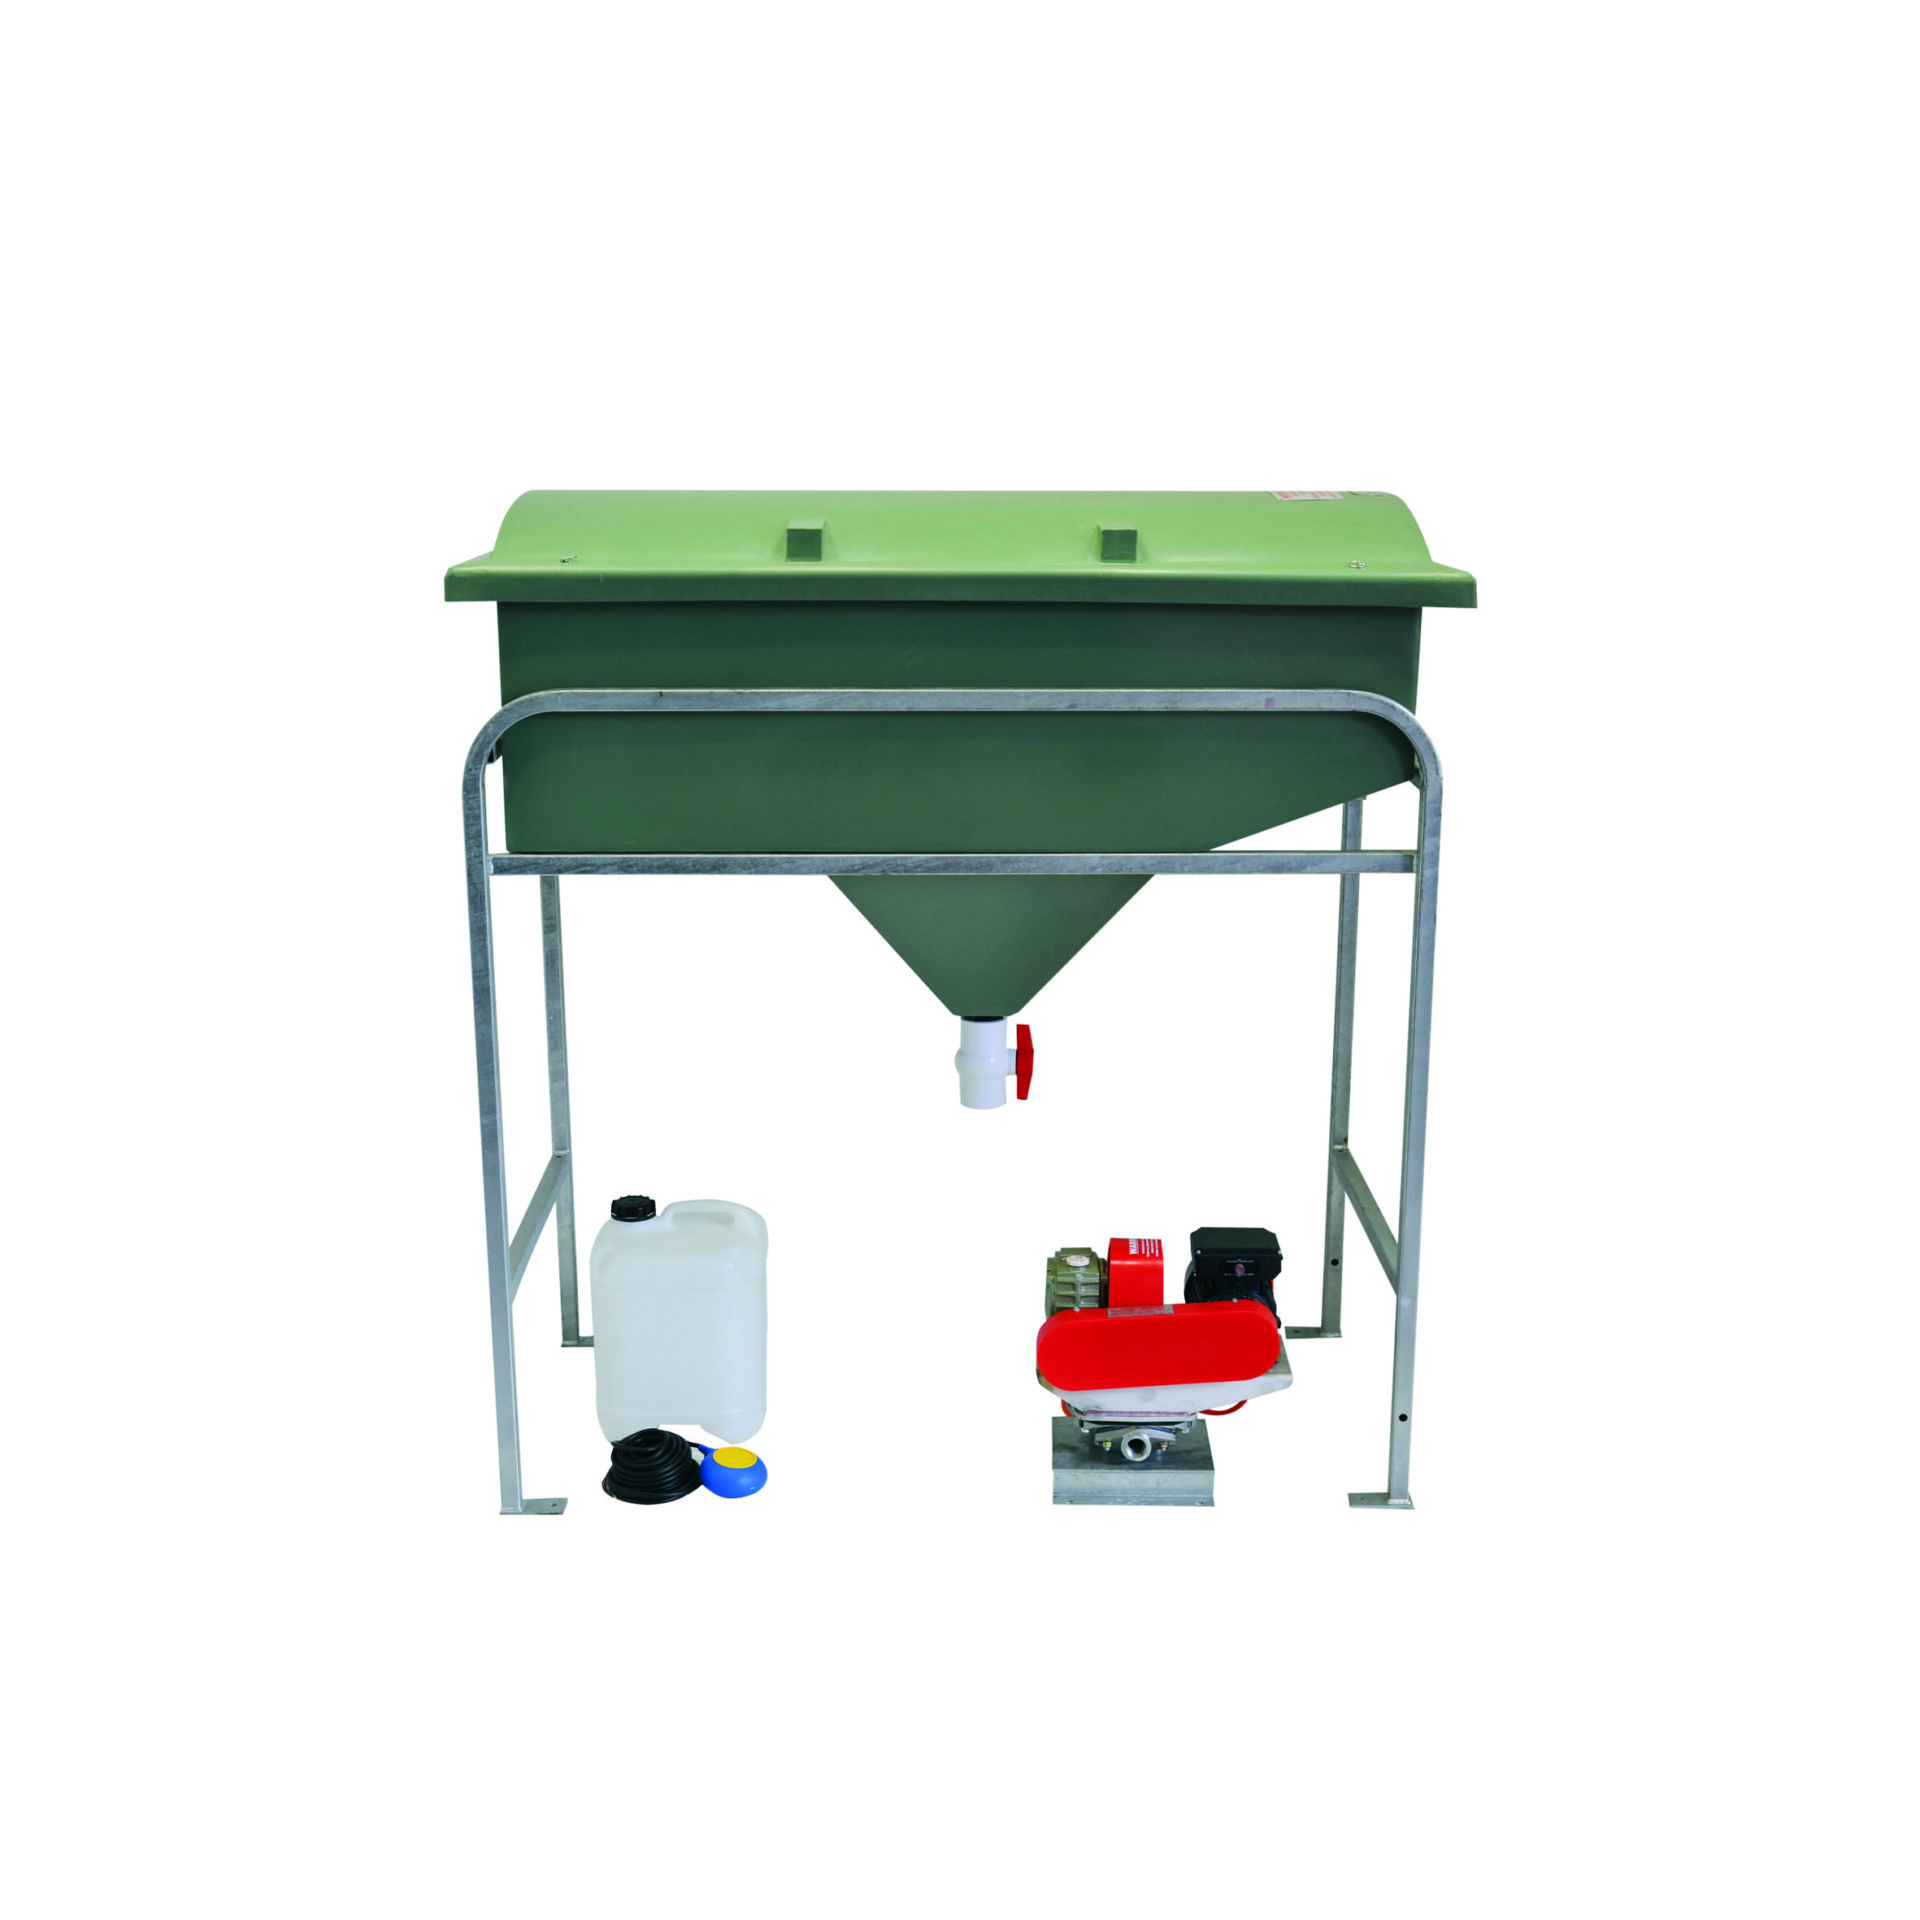 KCPS 1000 model oil water separator for efficient separation